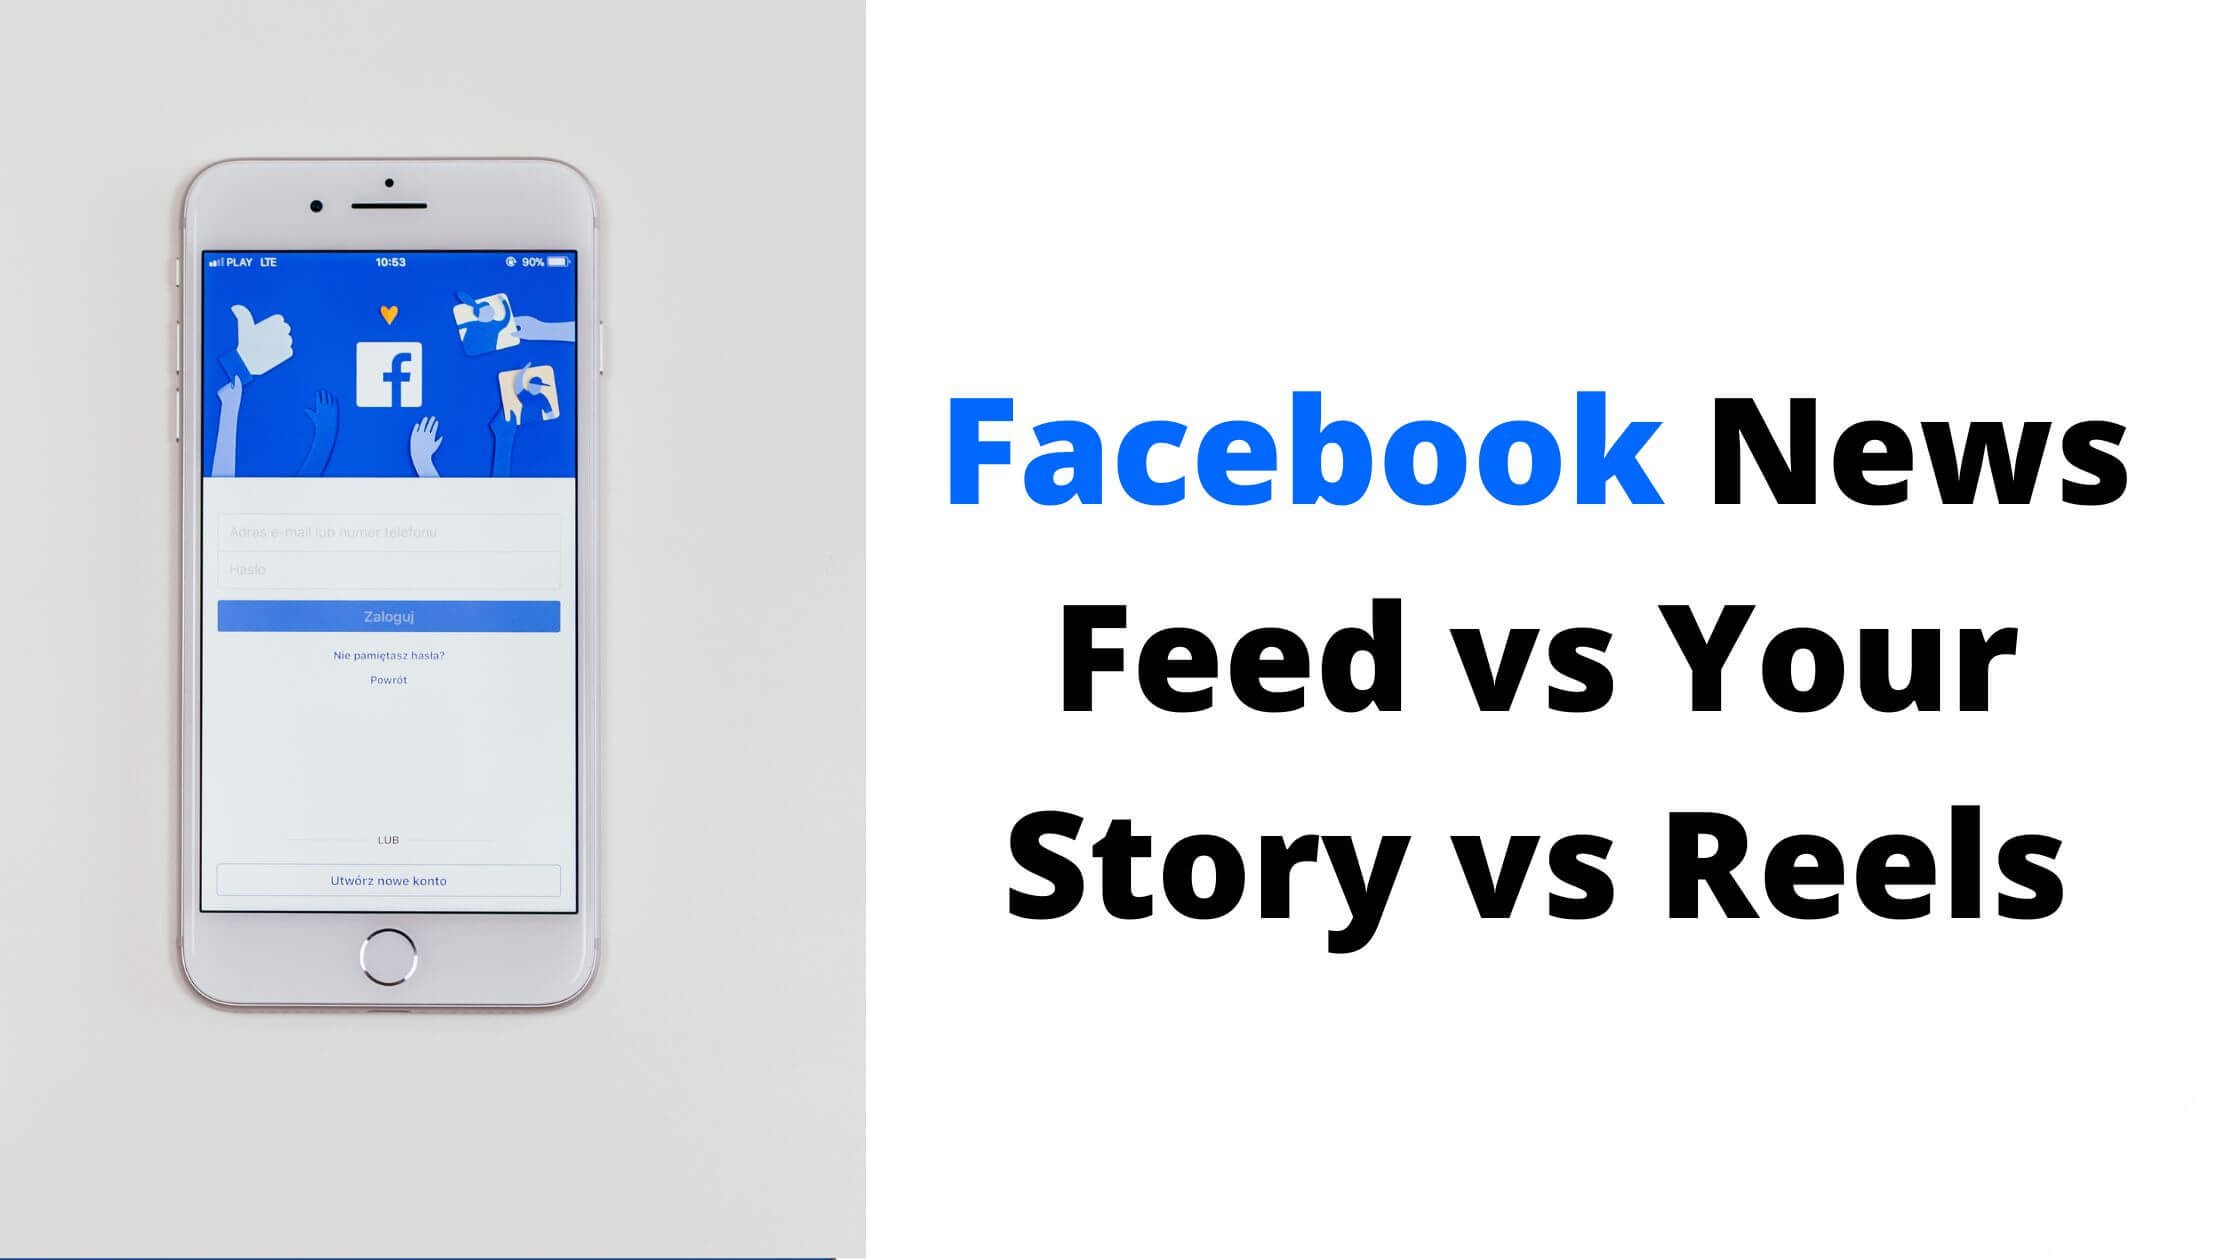 Facebook News Feed vs Your Story vs Reels